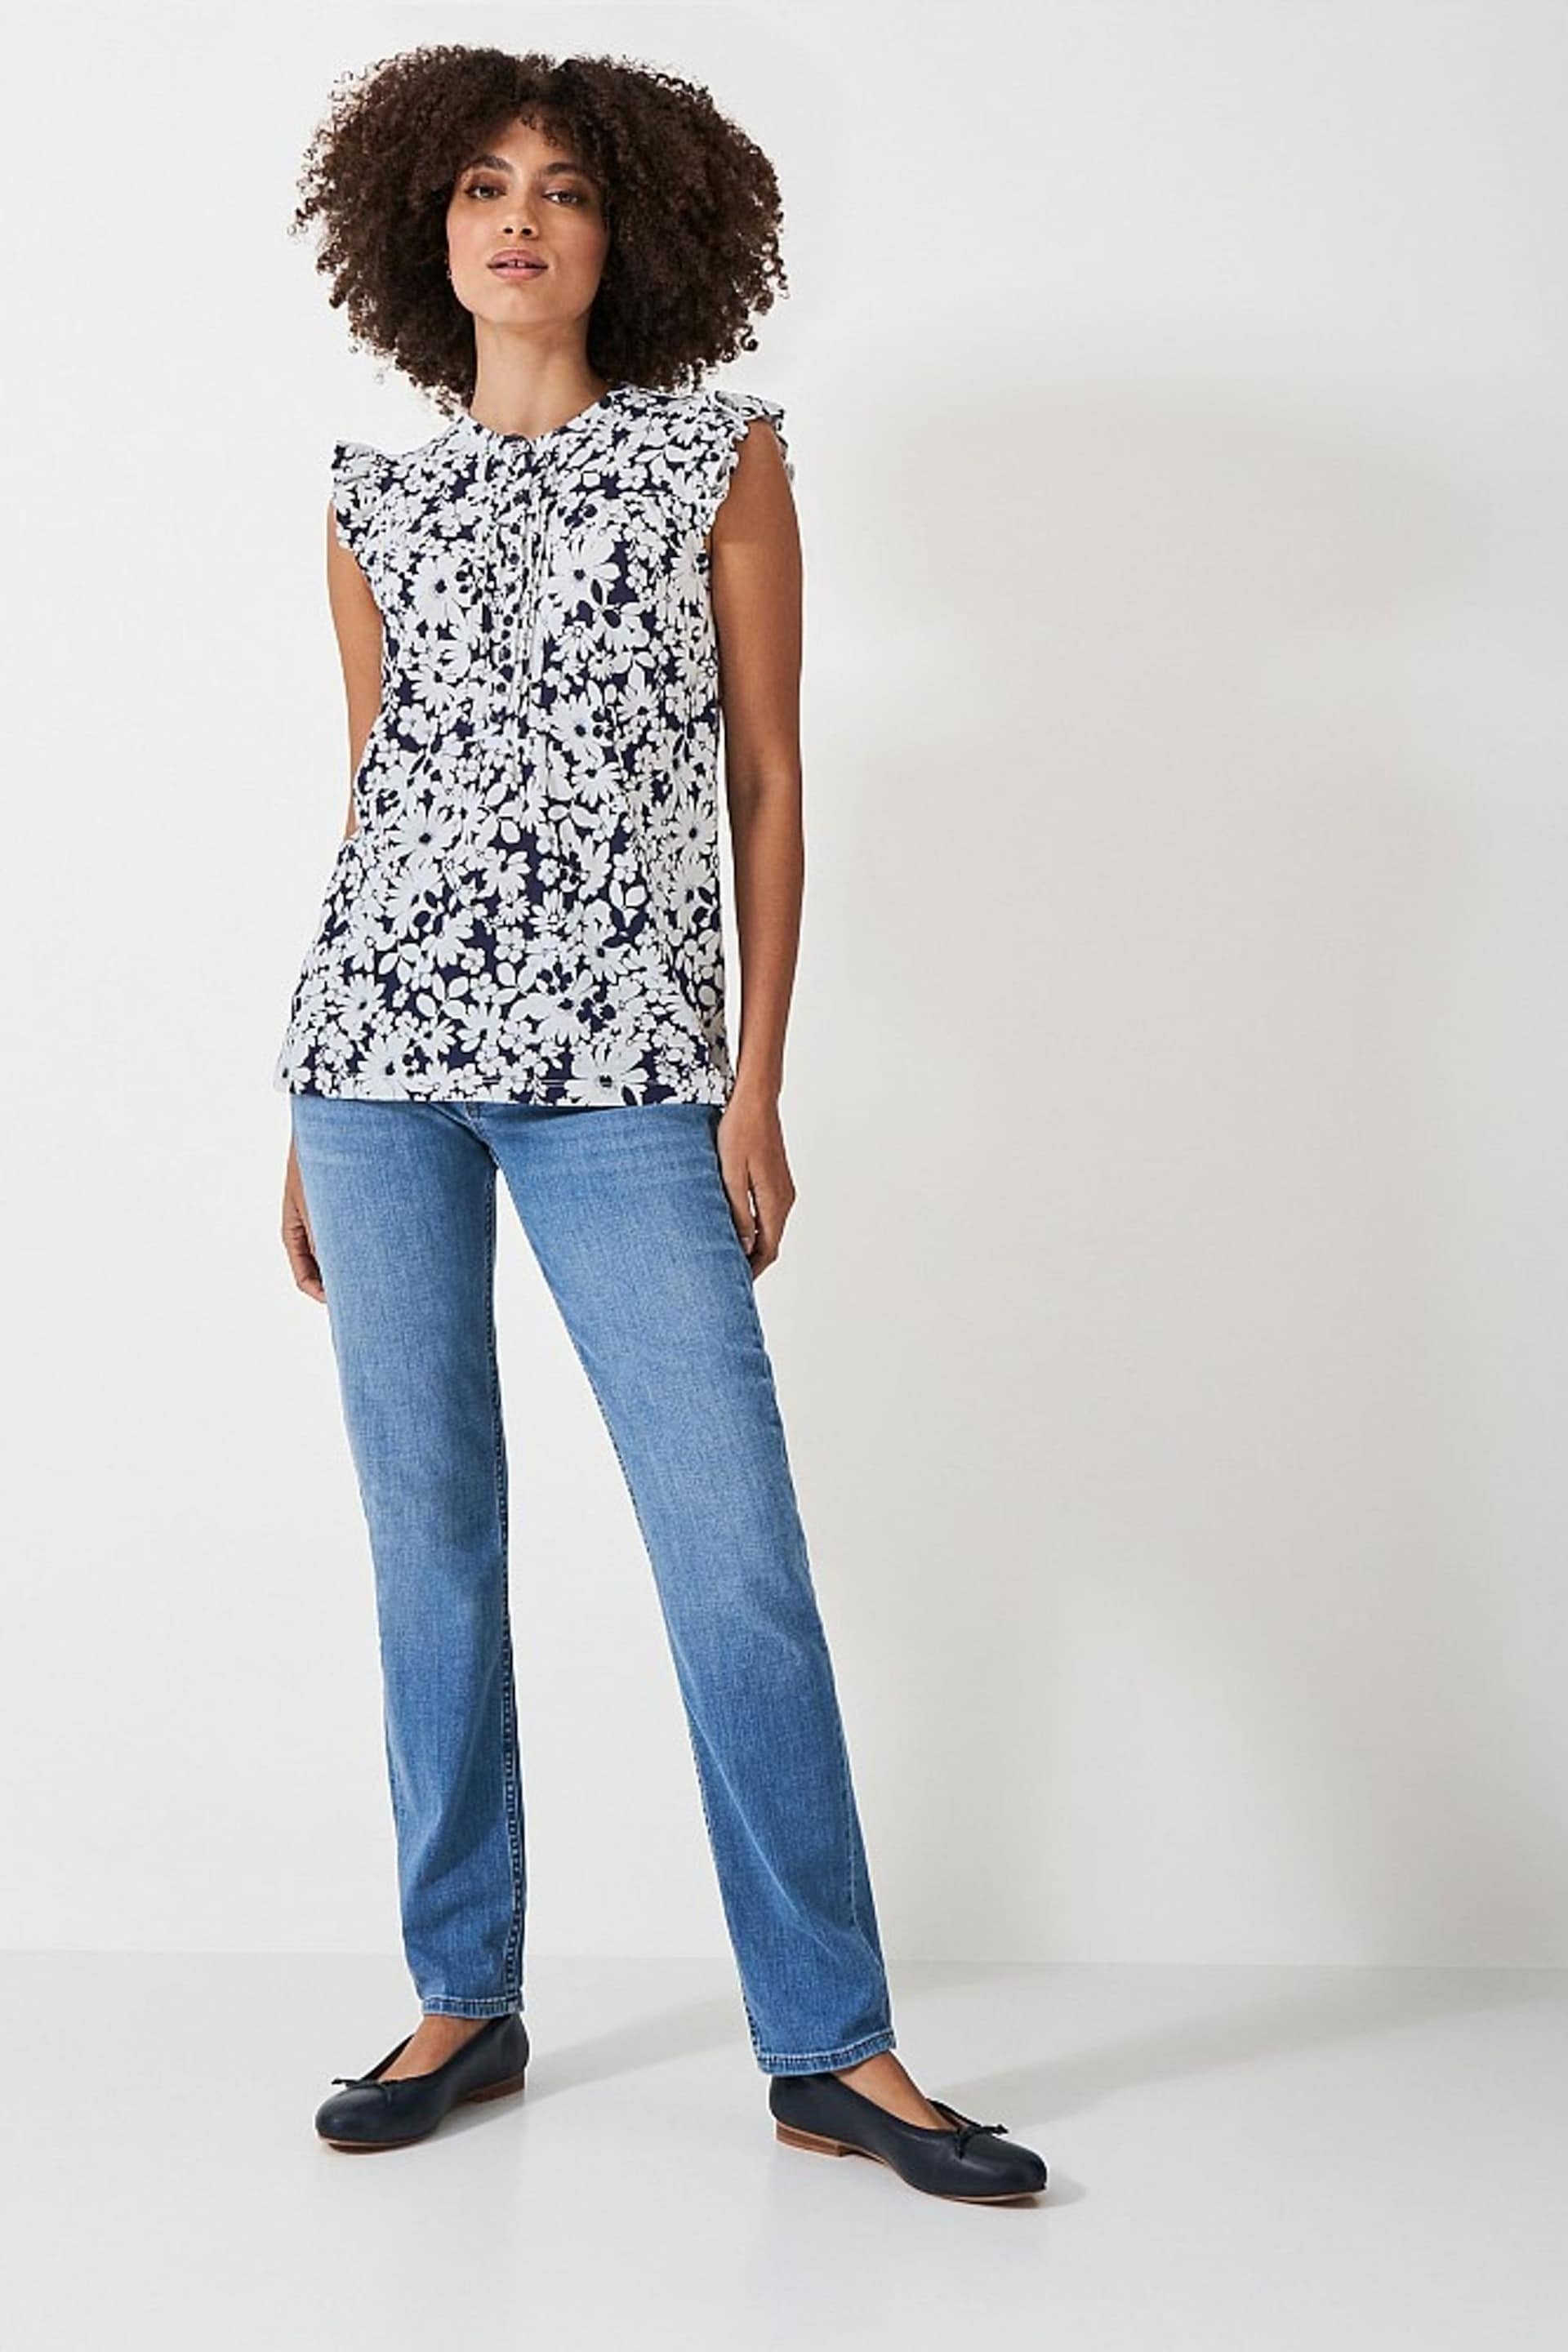 Crew Clothing Floral Print Ruffle Sleeve Blouse - Image 2 of 4